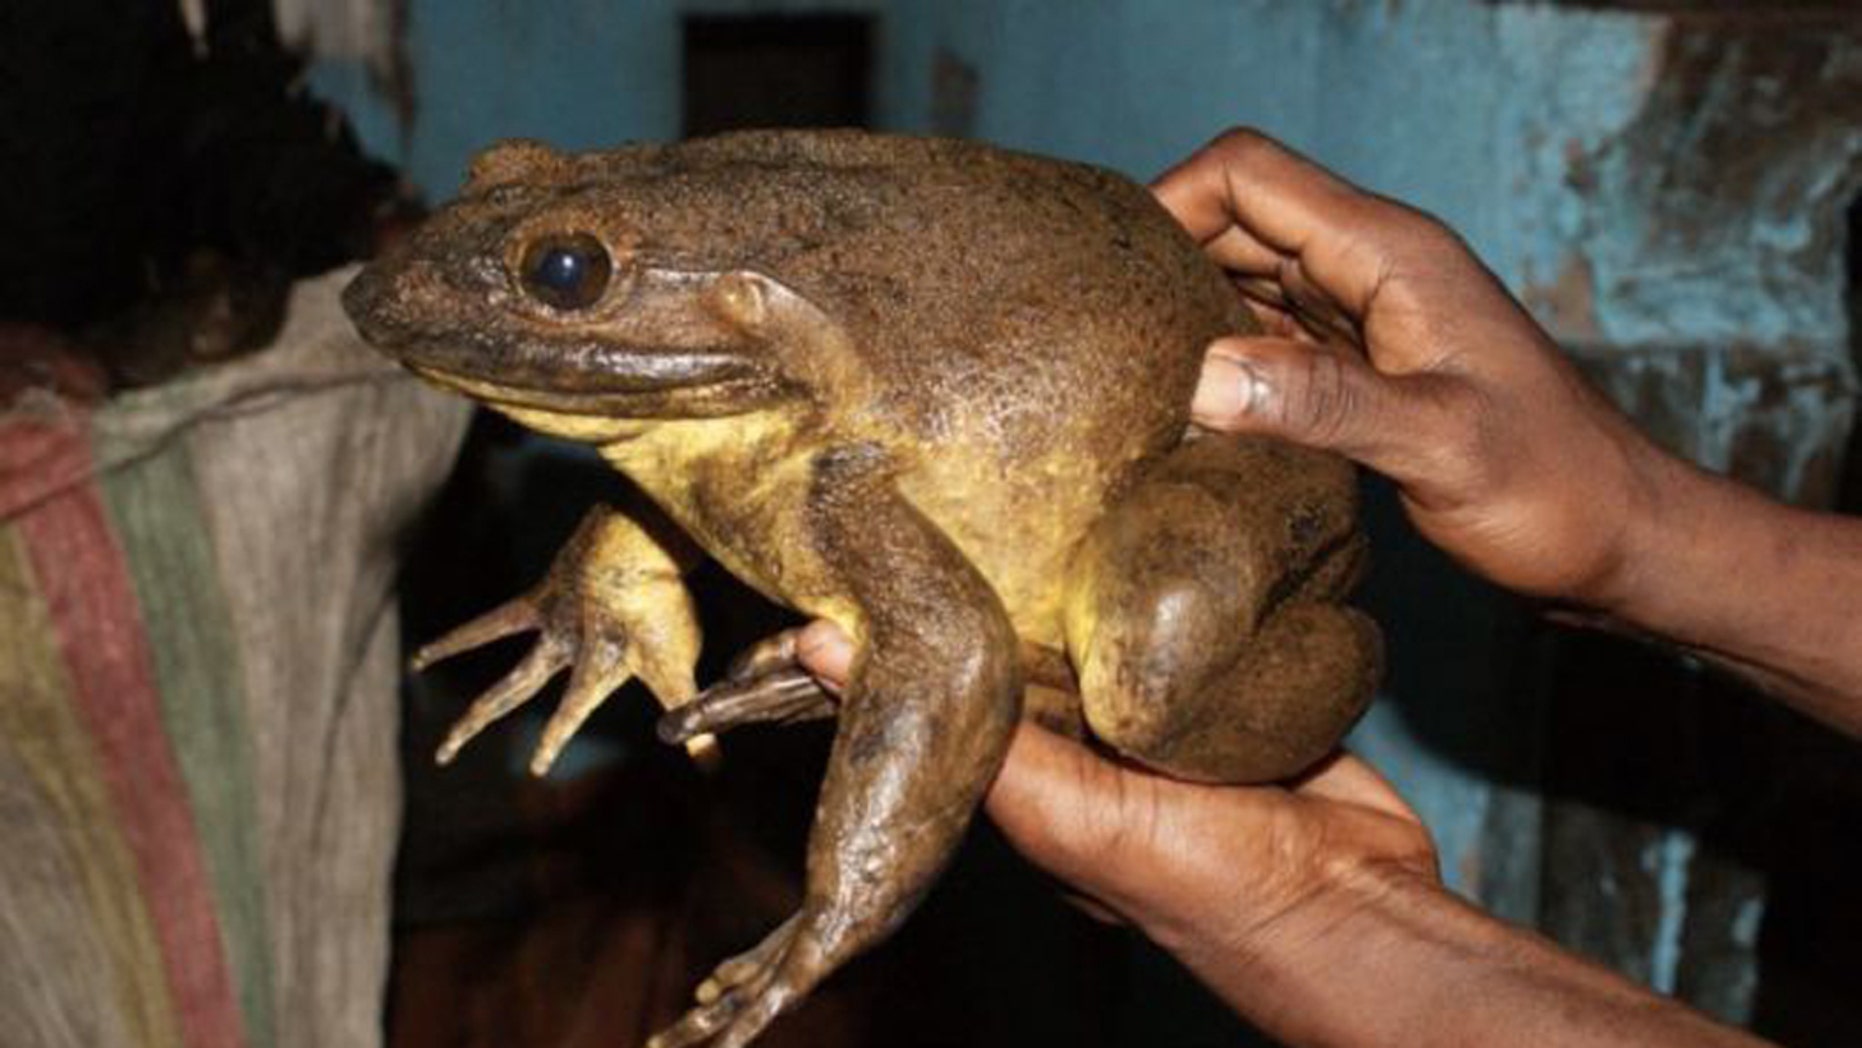 World's largest frogs can move rocks half their weight 2